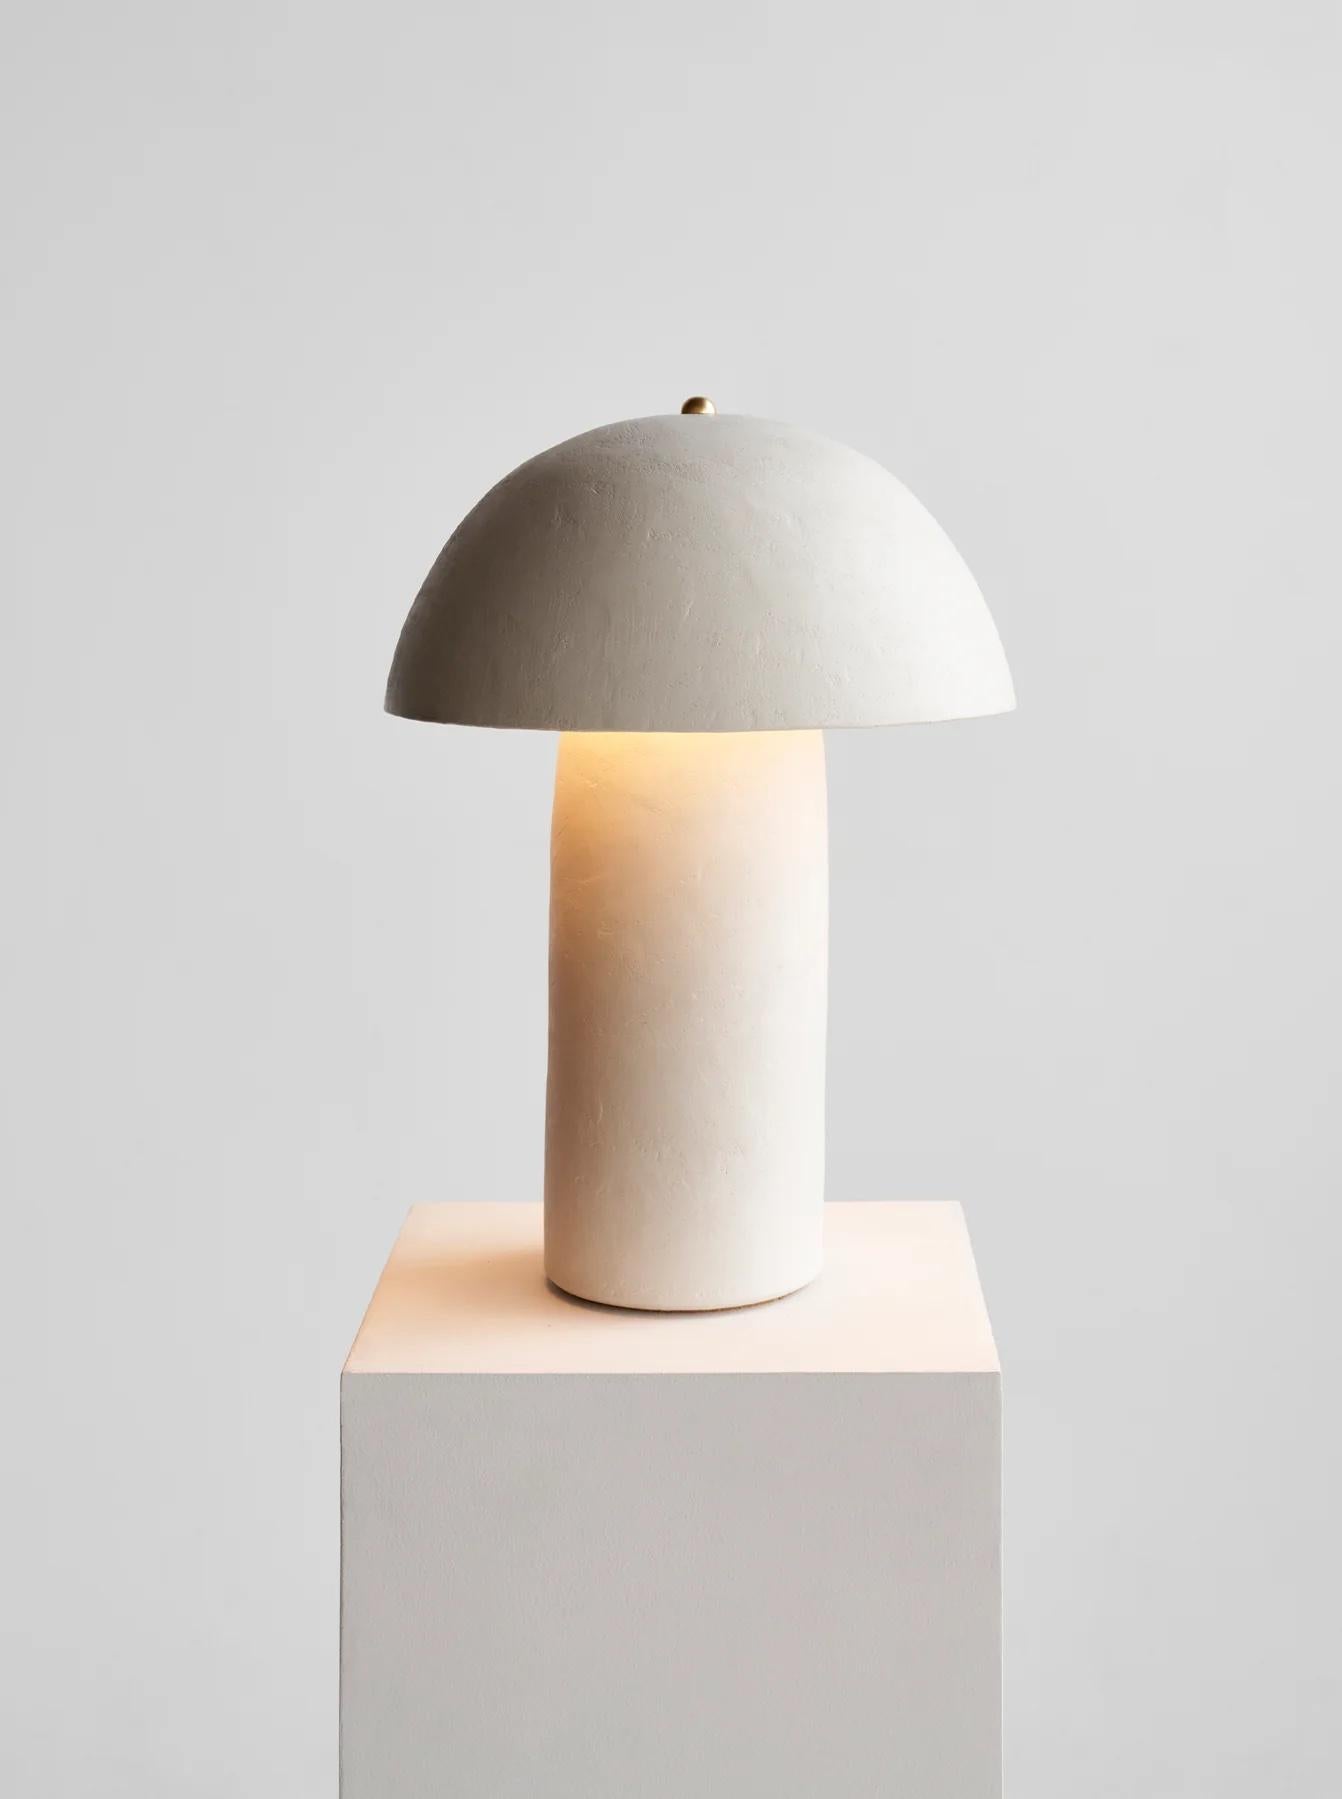 Contemporary XL Tera Lamp in Beige Lime Plaster by Ceramicah For Sale